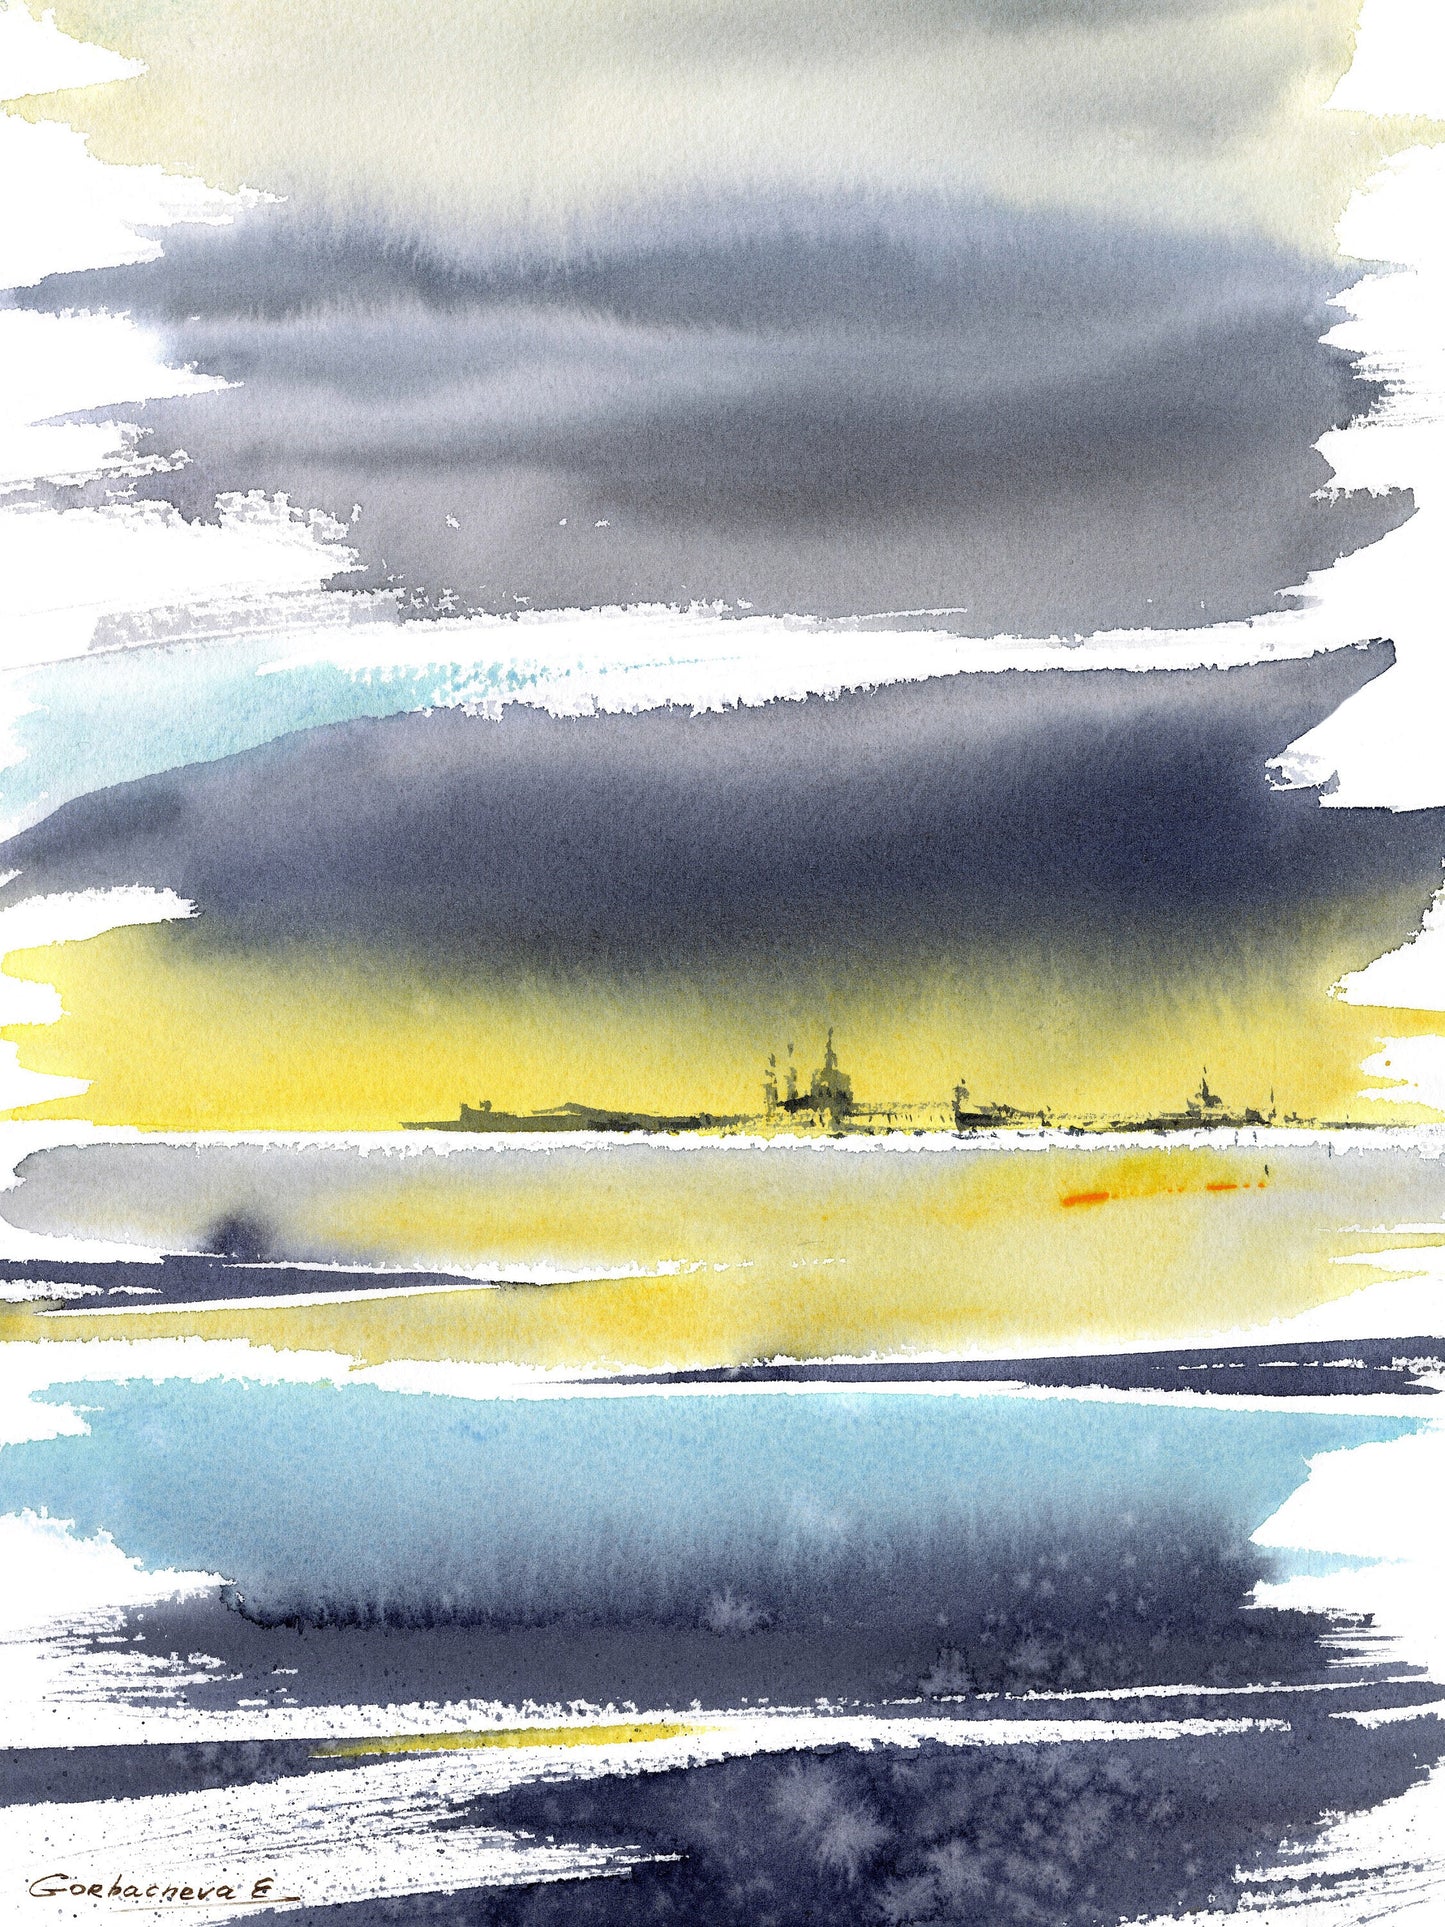 Abstract City Set Of 3 Art Prints, Ghost Town On Water, Modern Art, Yellow, Blue, Gray, Print Of Original Watercolor